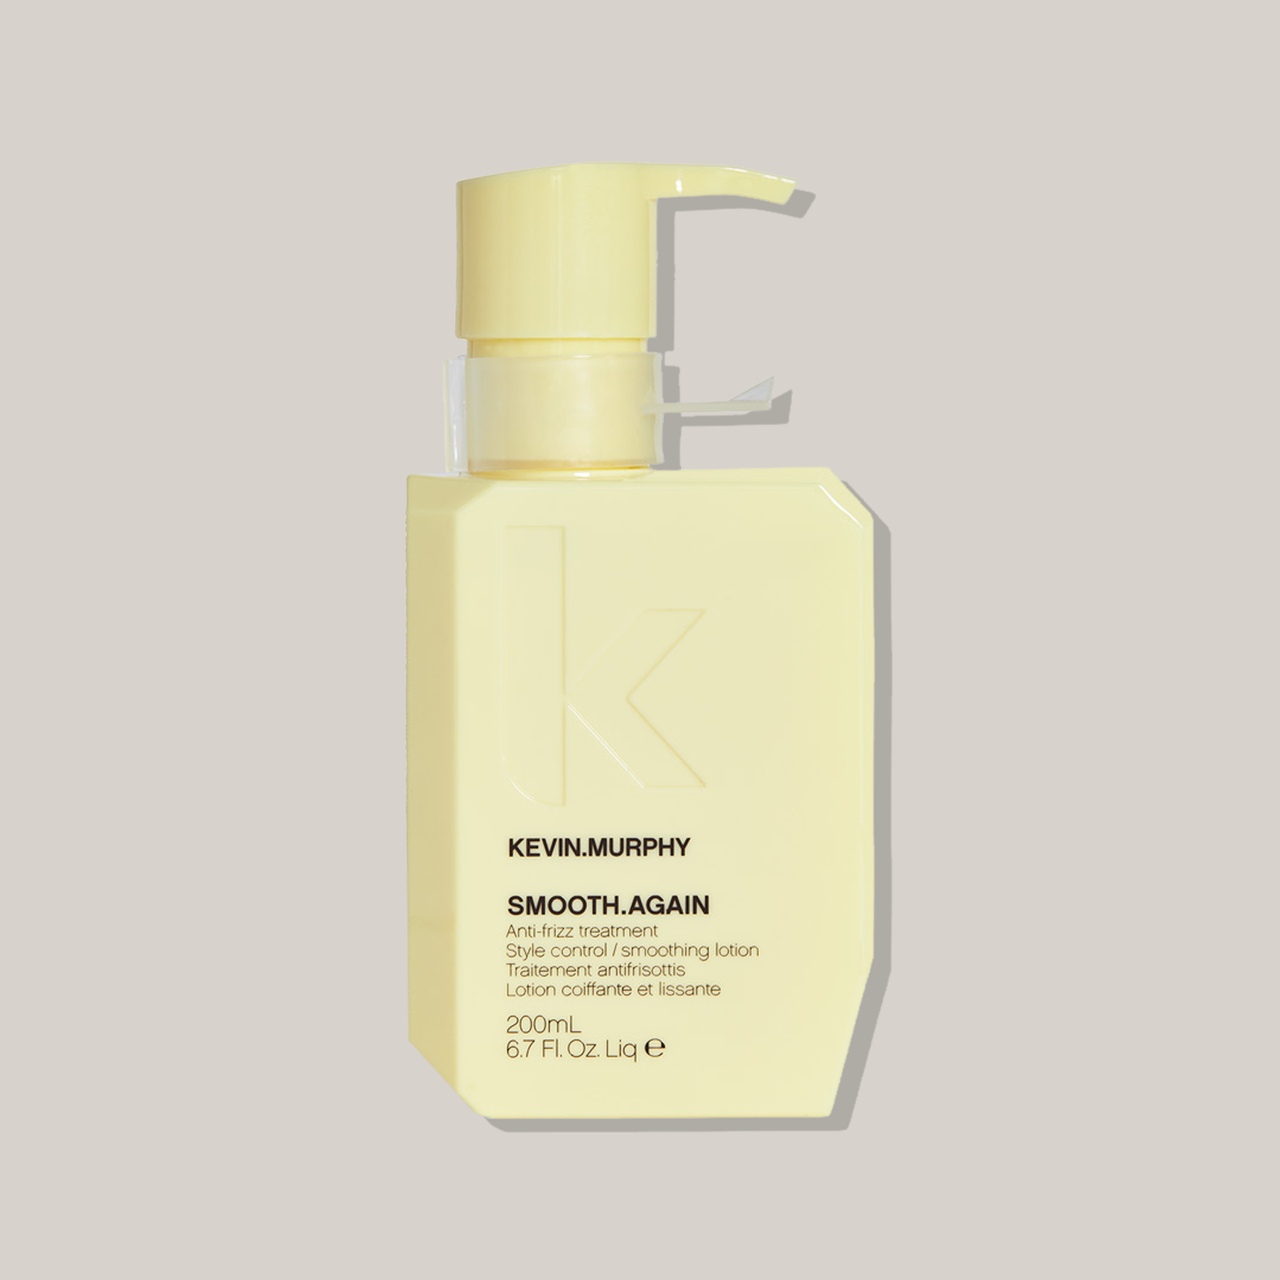 Kevin.murphy SMOOTH.AGAIN 